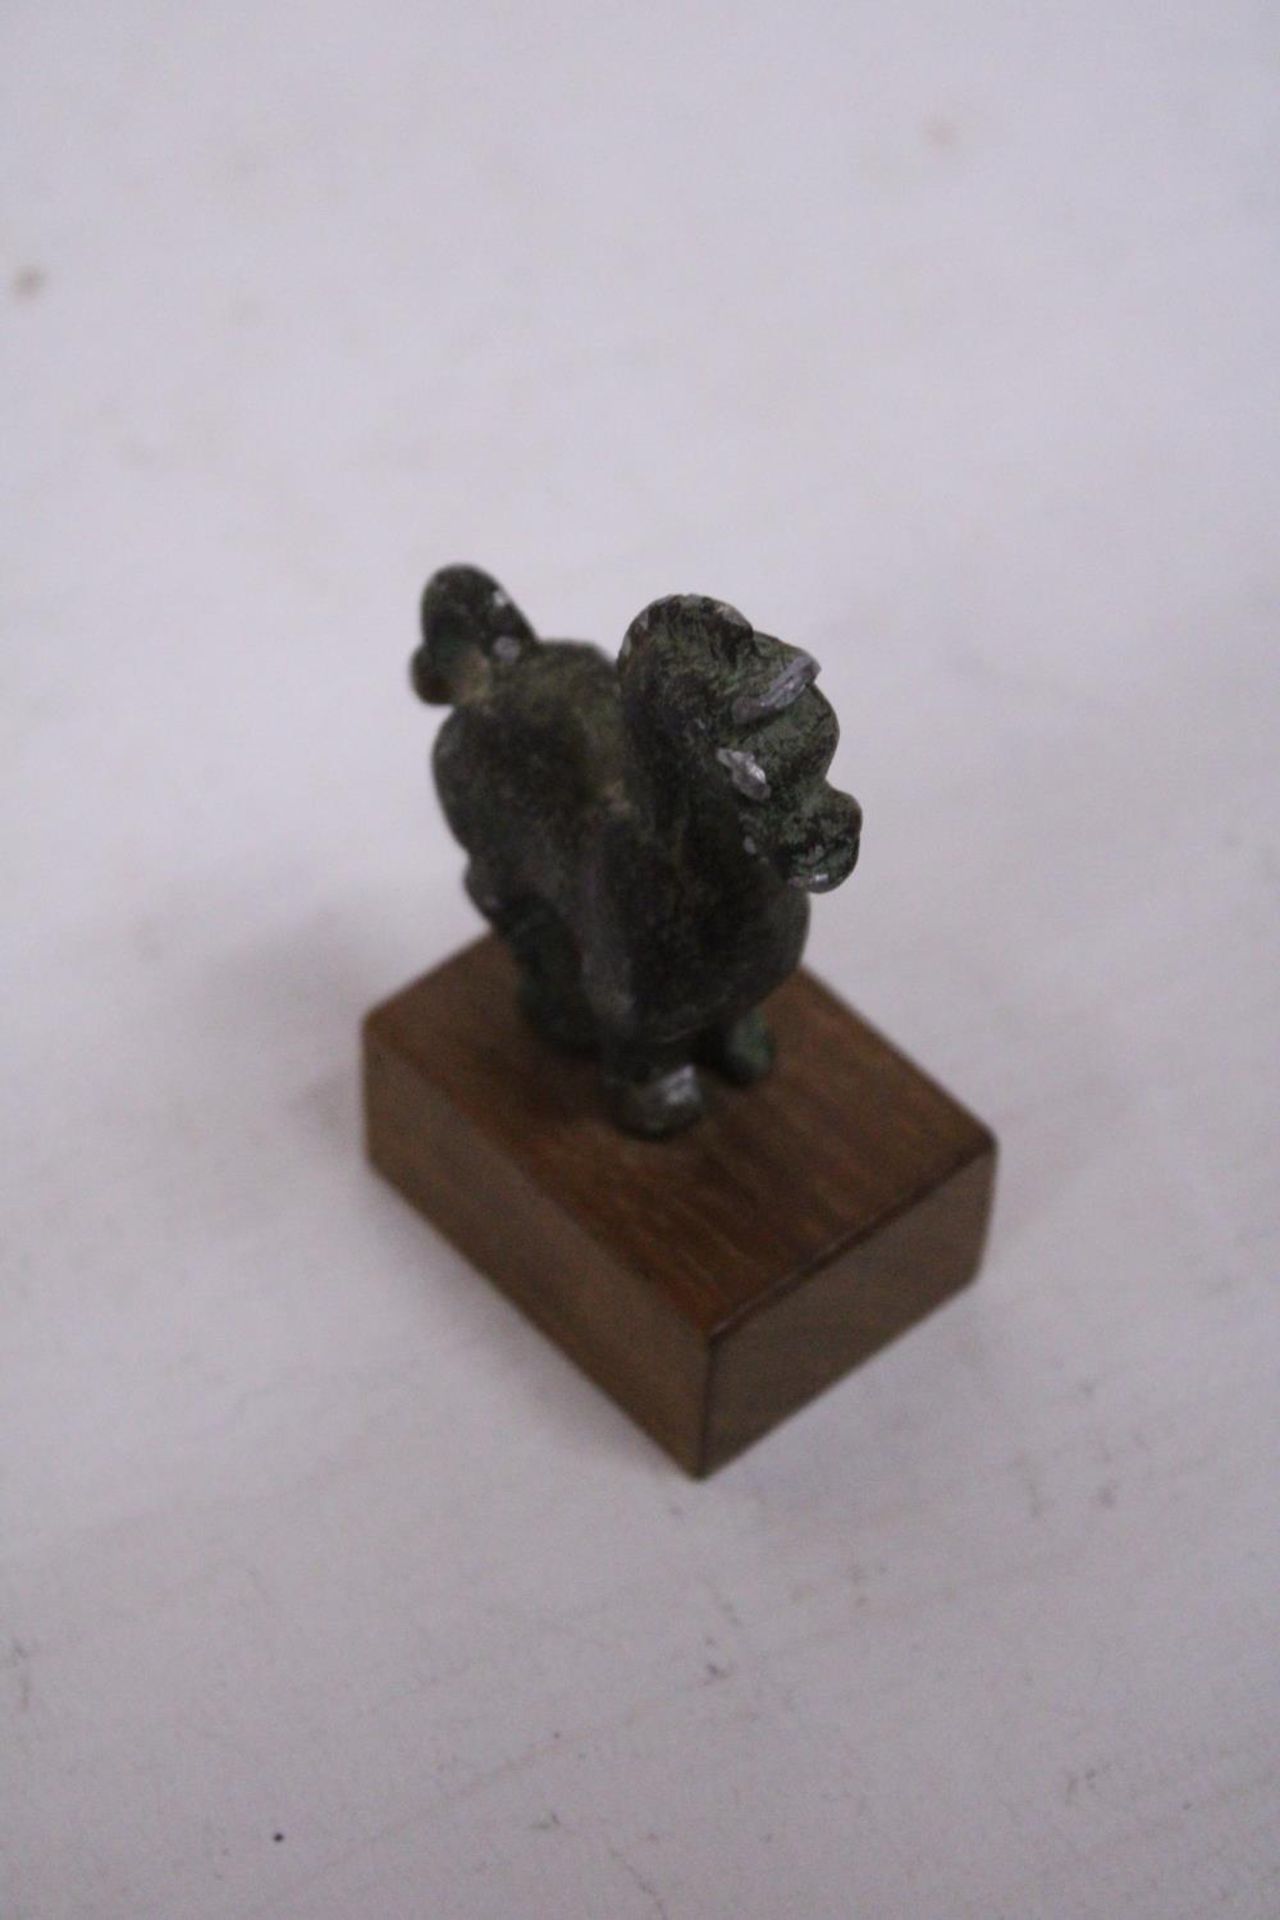 A REPRODUCTION BRONZE OF A CHINESE HAN MING HORSE FROM THE ART INSTITUTE OF CHICAGO ALVA STUDIOS - 8 - Image 3 of 3